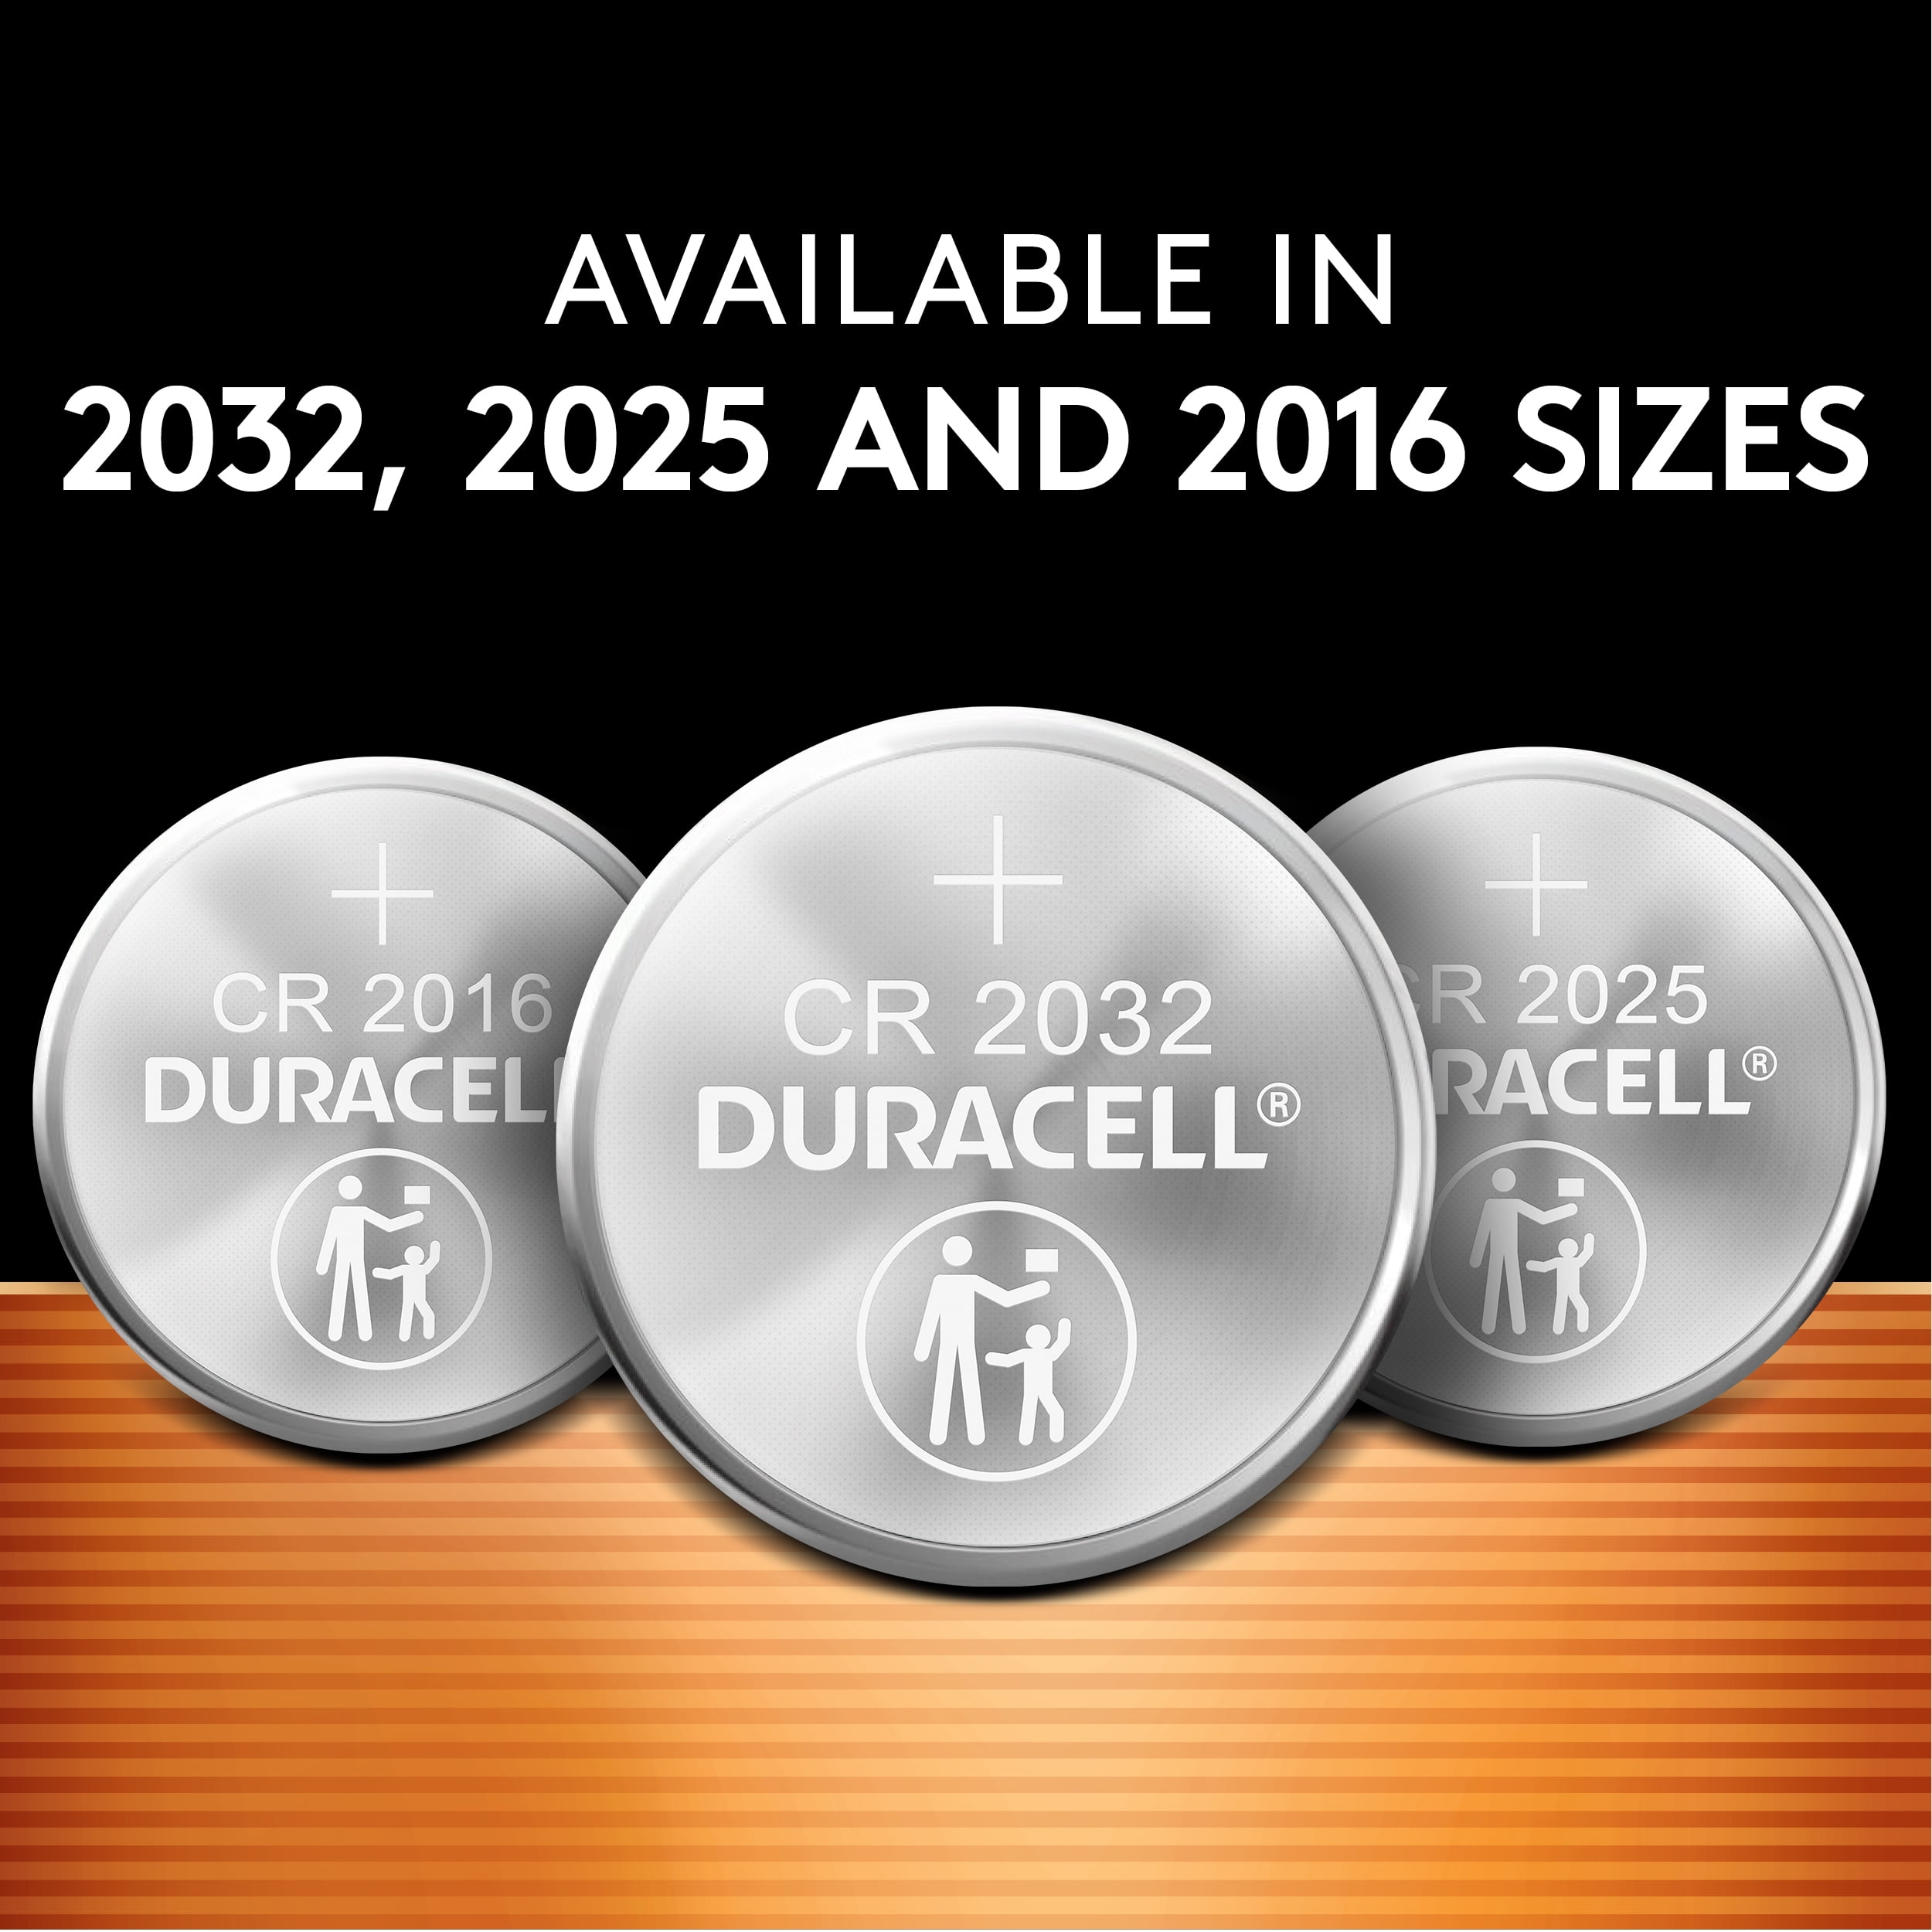 Duracell CR2032 3V Lithium Coin Battery with Child Safety Features,  Compatible with Apple AirTag, Key Fob, Car Remote, Glucose Monitor, and  other Devices, CR Lithium 3 Volt Cell (4 Count Pack) 